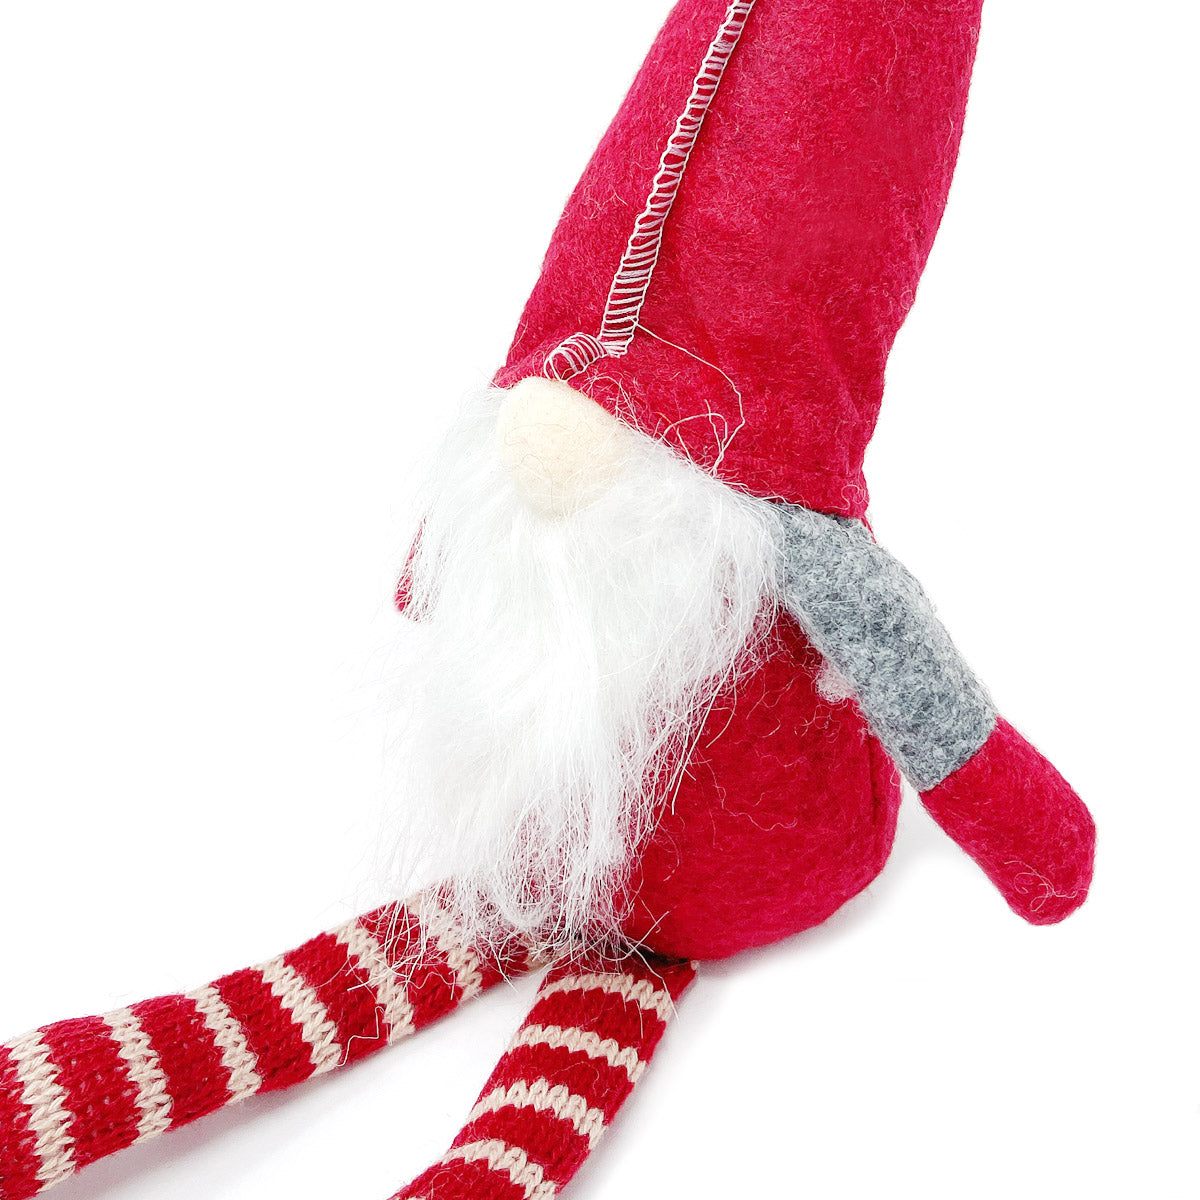 Wrapables Long-Legged Gnome Plush Dolls, Winter and Holiday Tabletop Decorations (Set of 2)